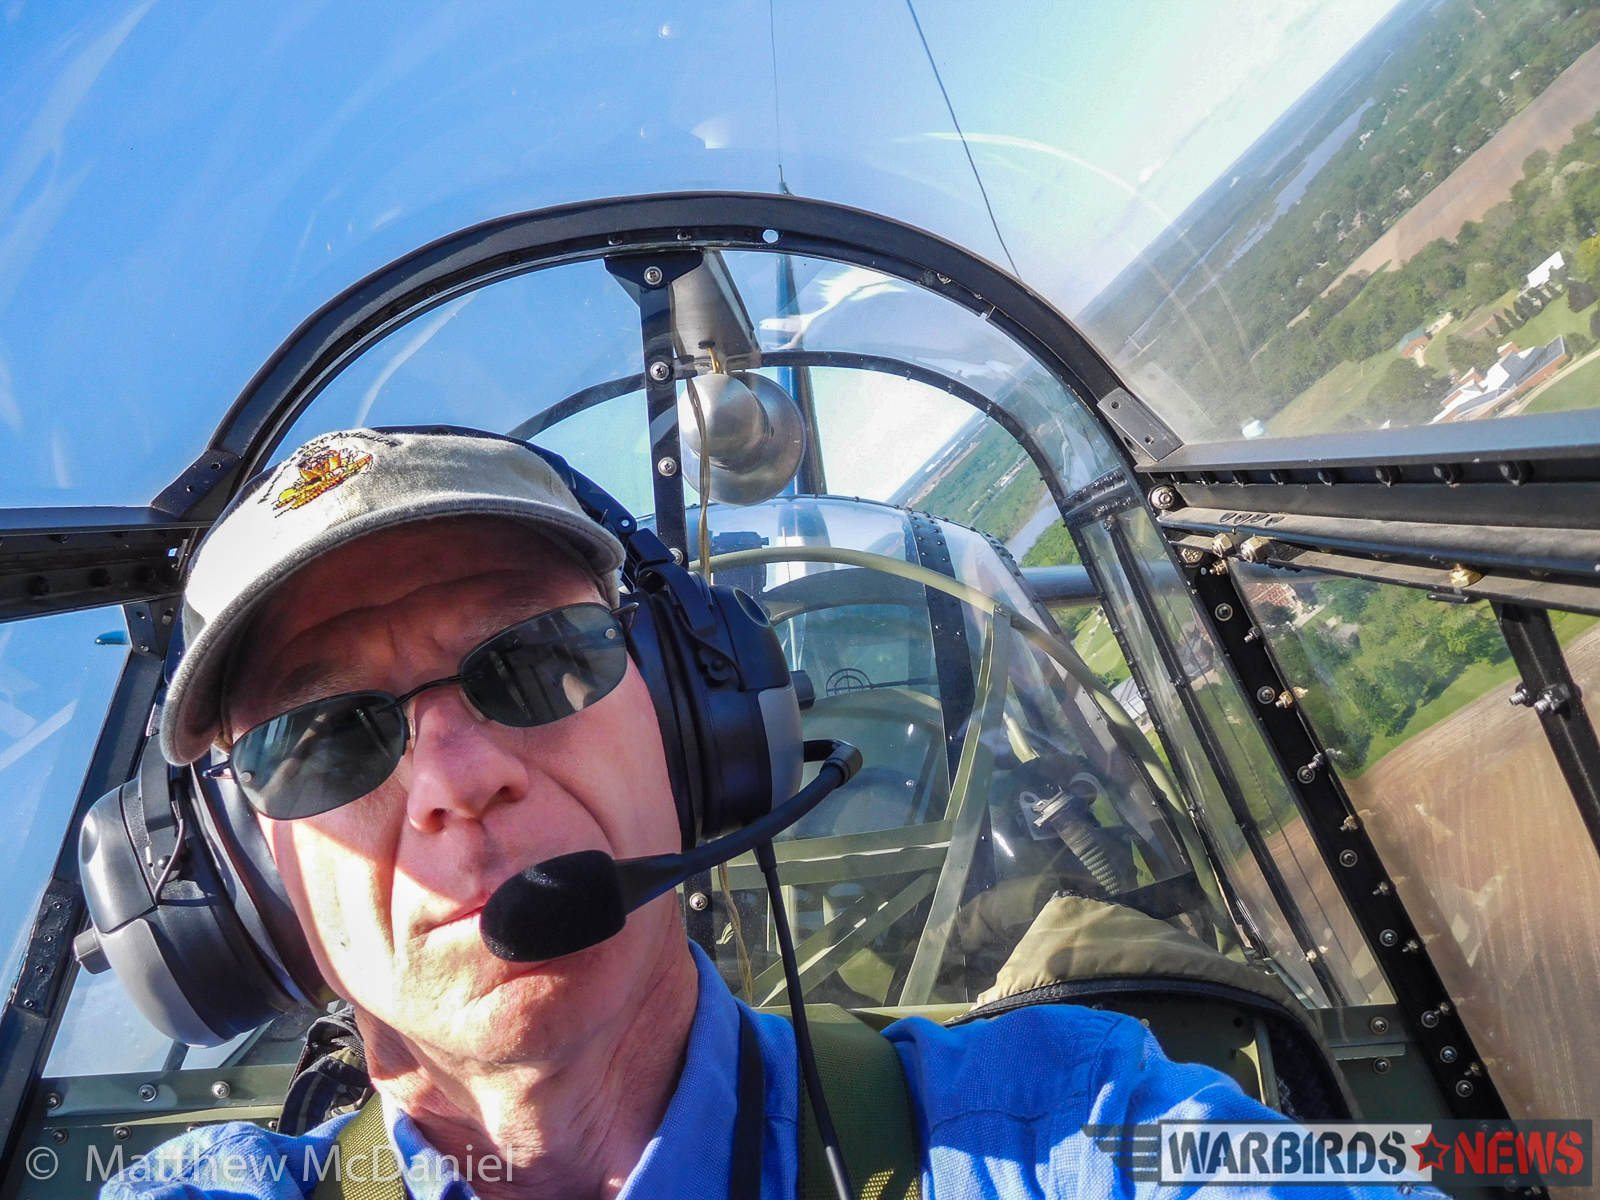 The author maneuvering through some moderate-bank turns in a dual-control TBM-3E. (Photo by Matthew McDaniel)